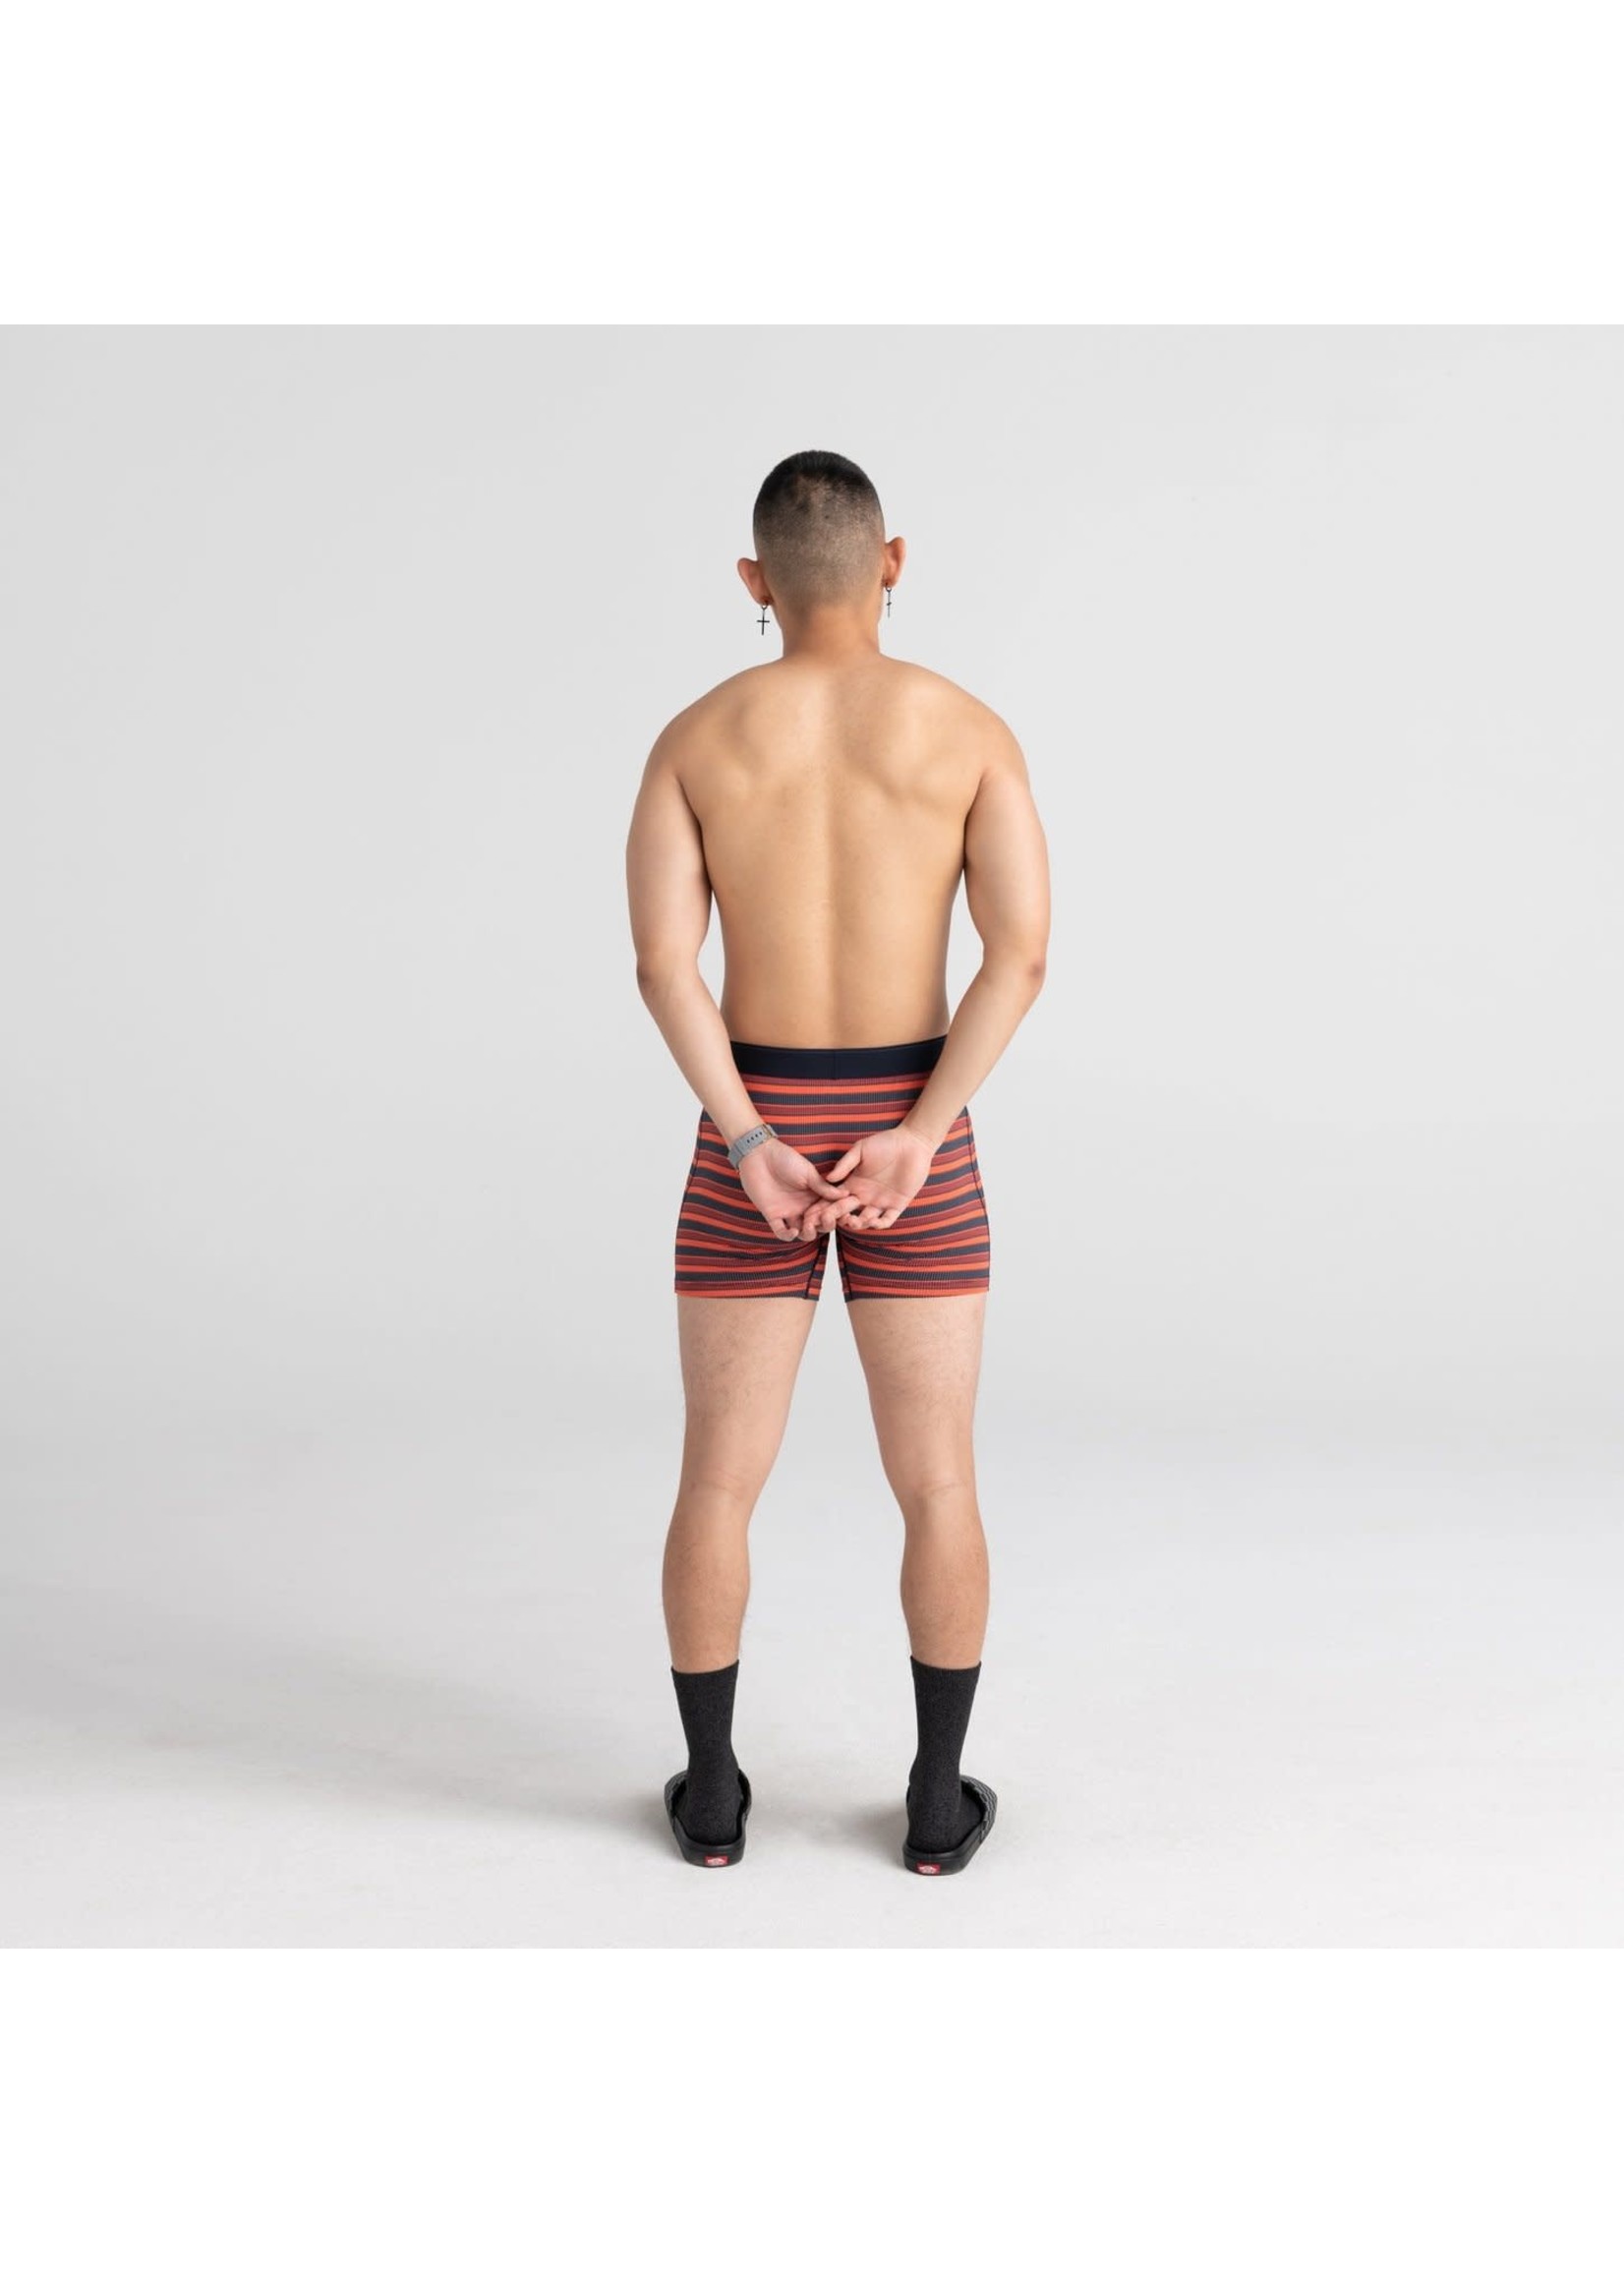 SAXX Quest Adventure Boxer Brief Fly Red